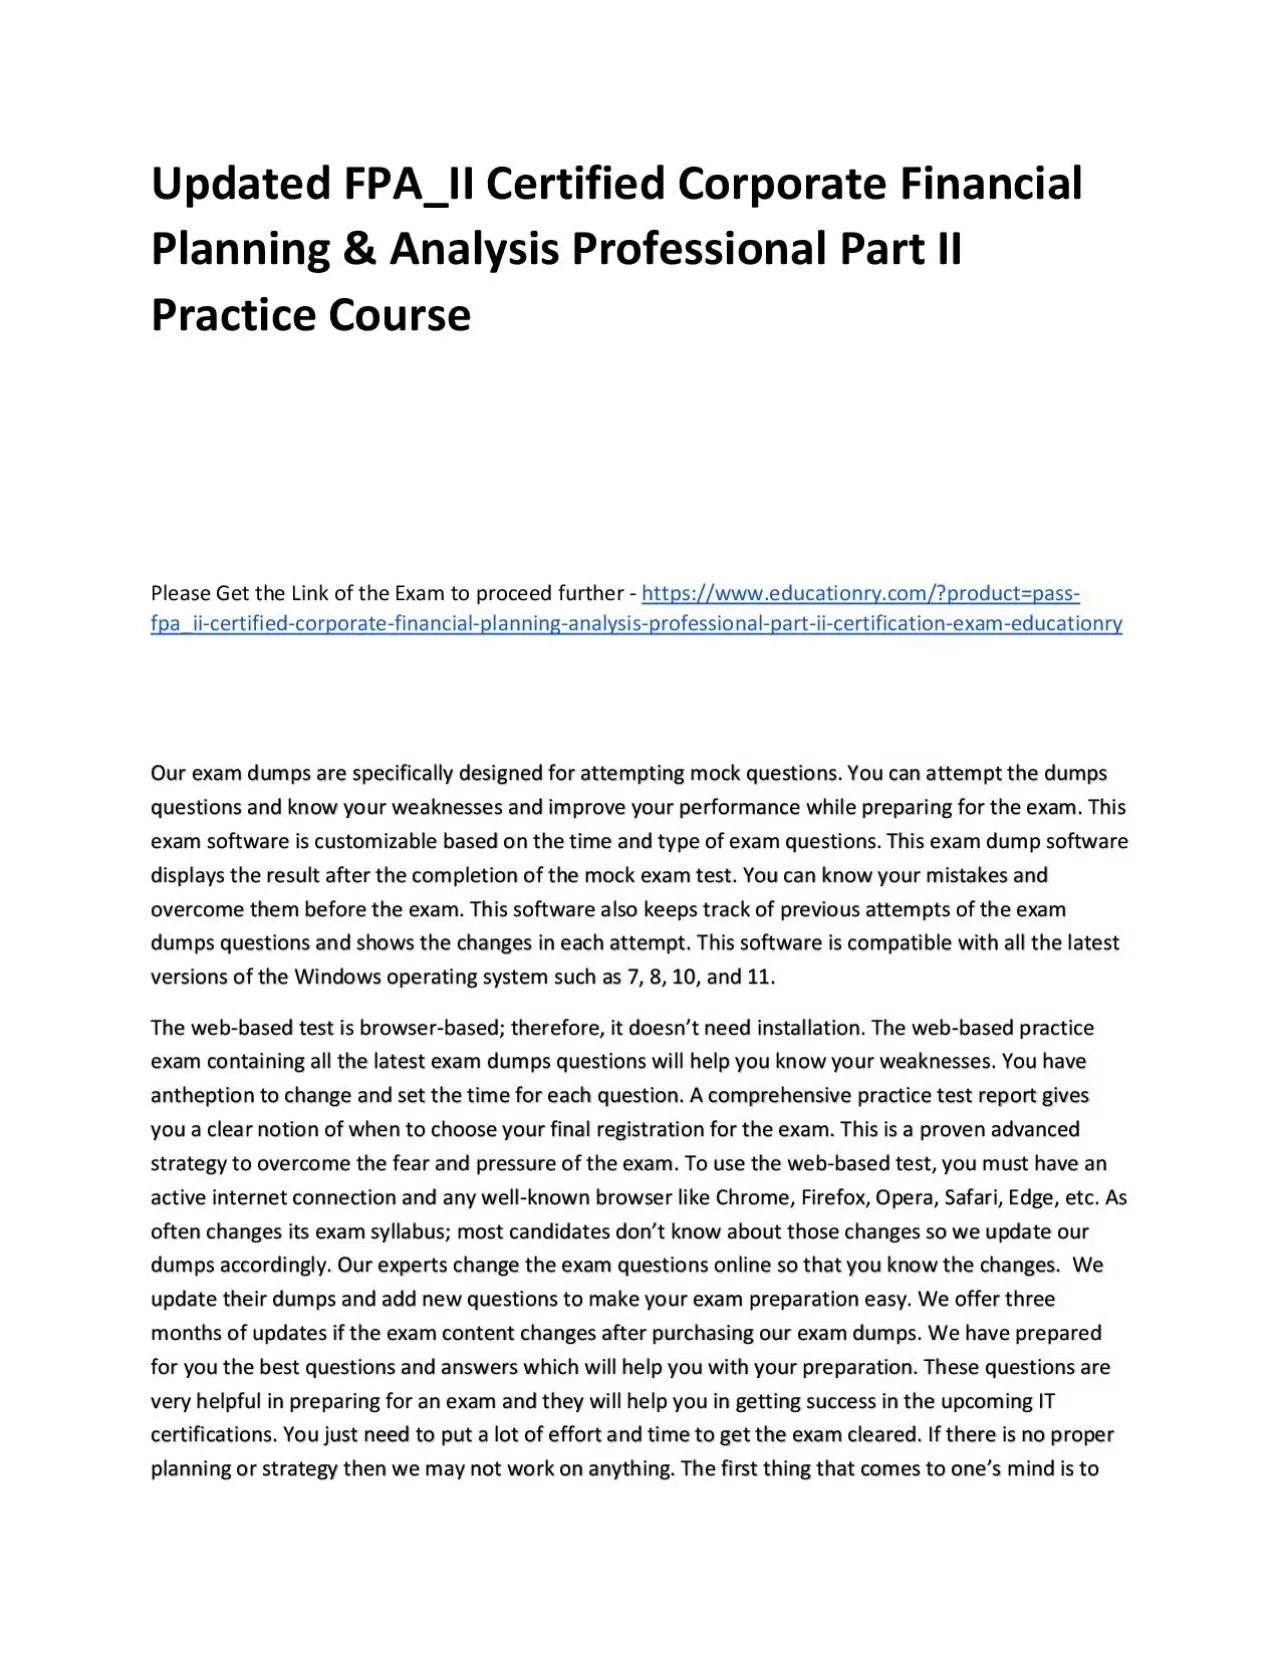 Updated FPA_II Certified Corporate Financial Planning & Analysis Professional Part II